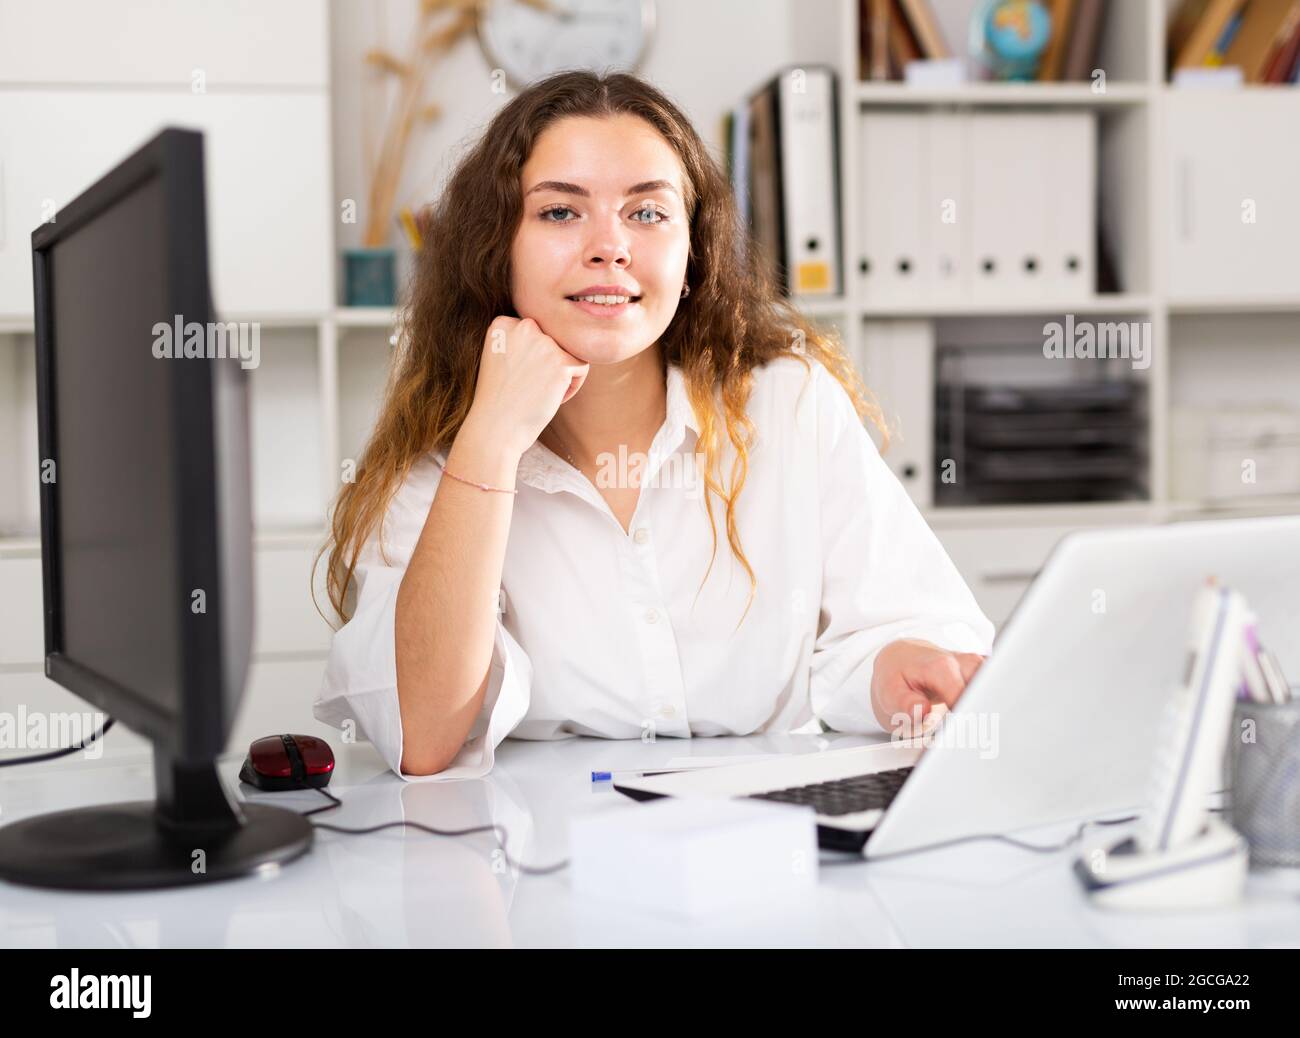 Portrait of young female office worker Stock Photo - Alamy